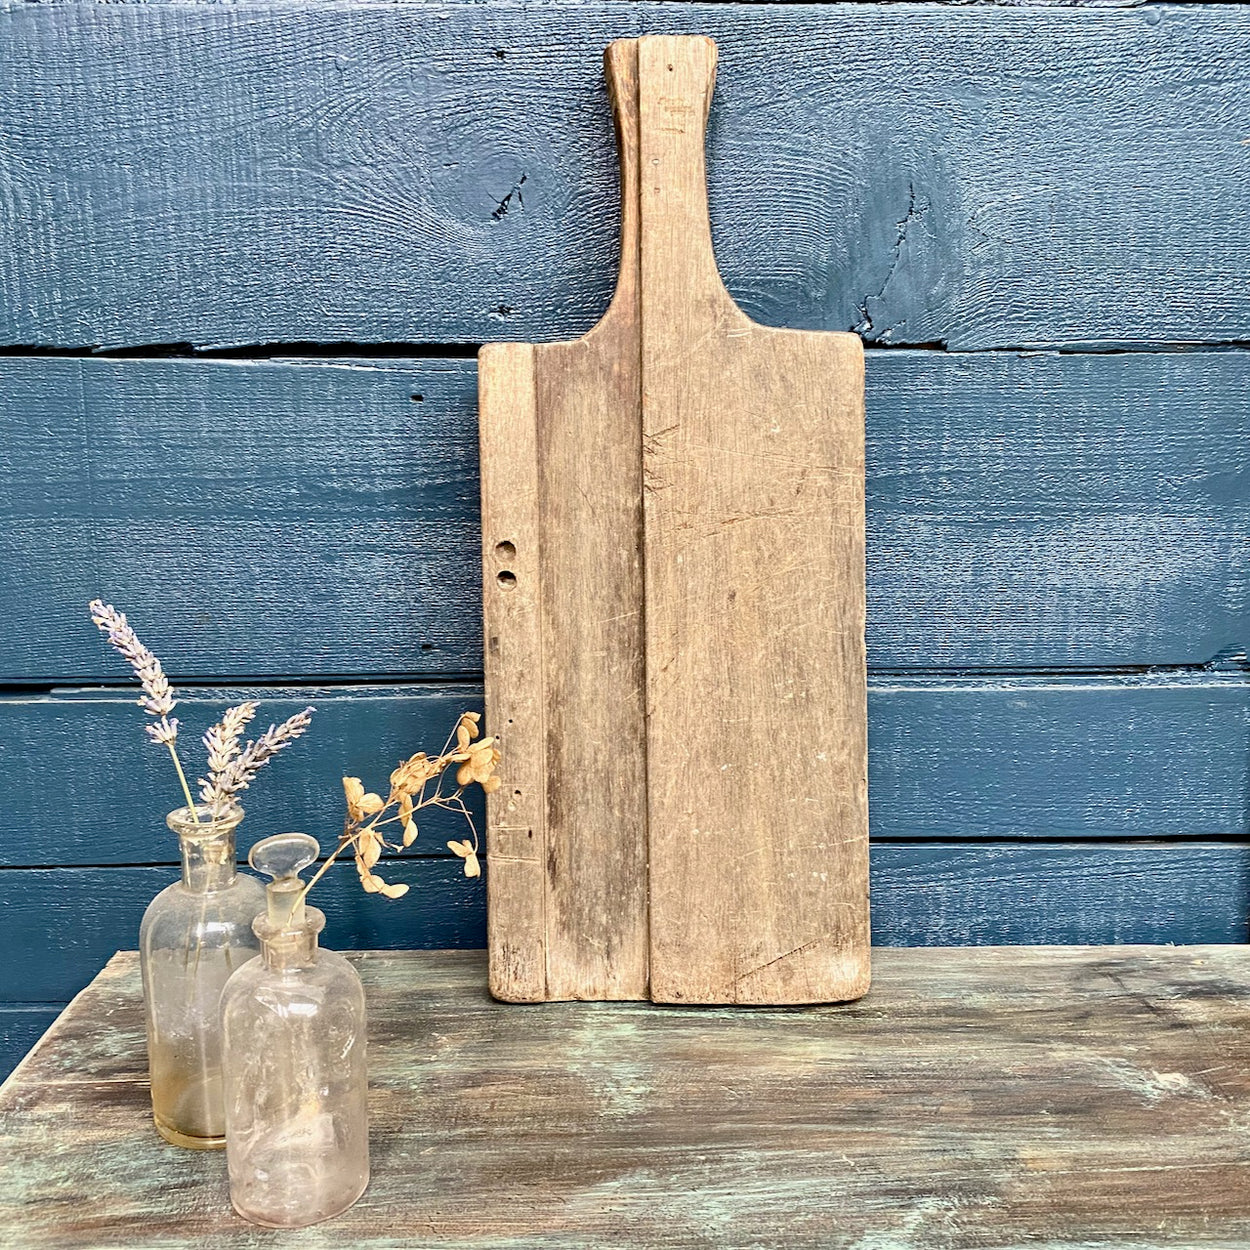 Antique French Chopping Board